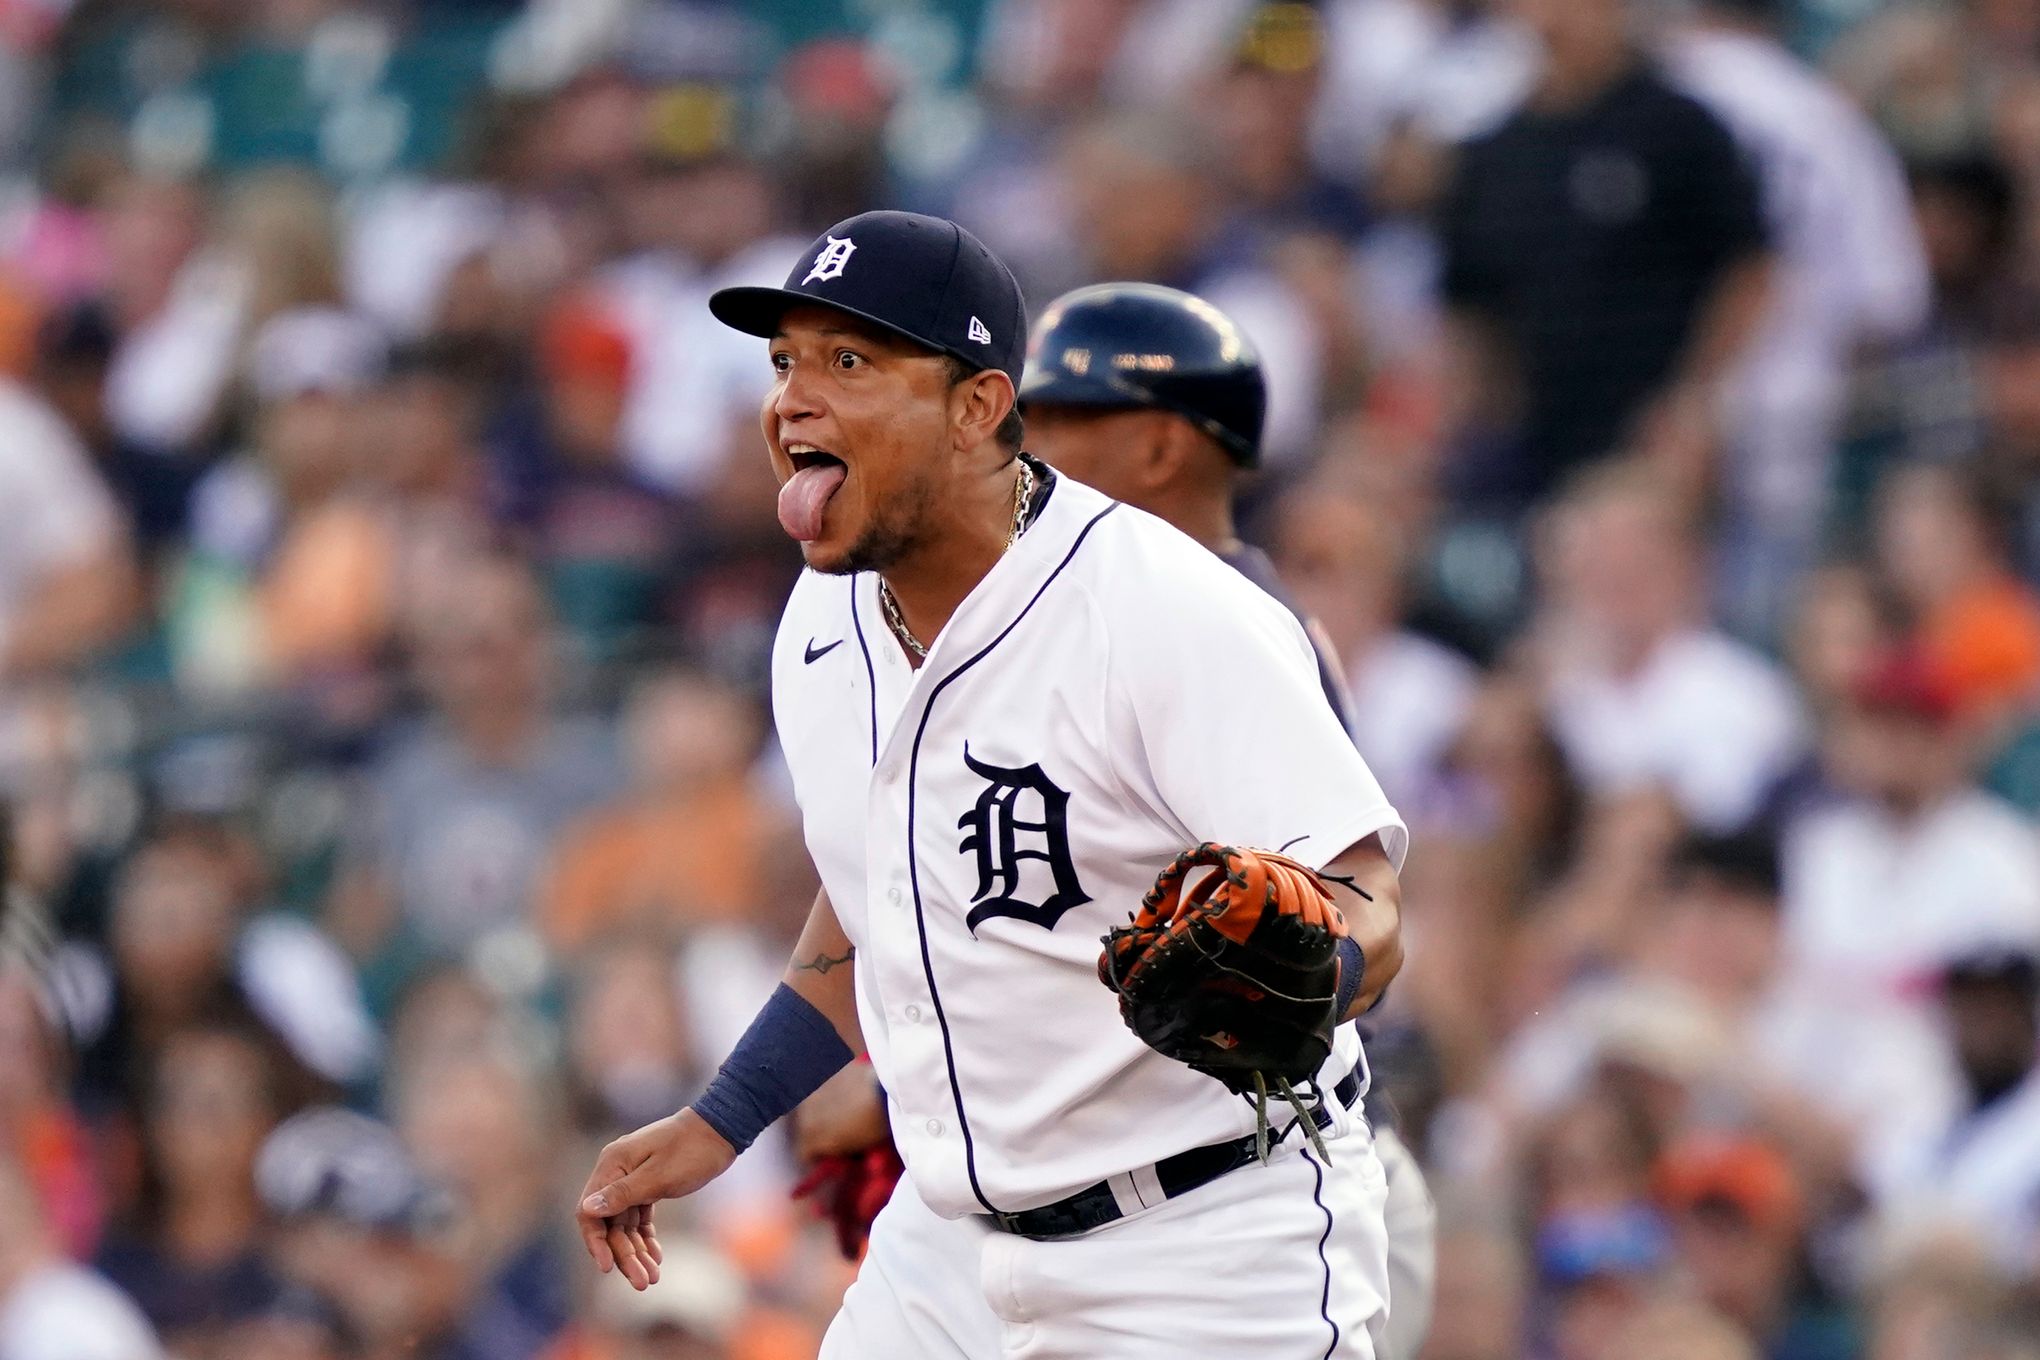 Detroit Tigers' Miguel Cabrera, Gregory Soto win All-Star Game